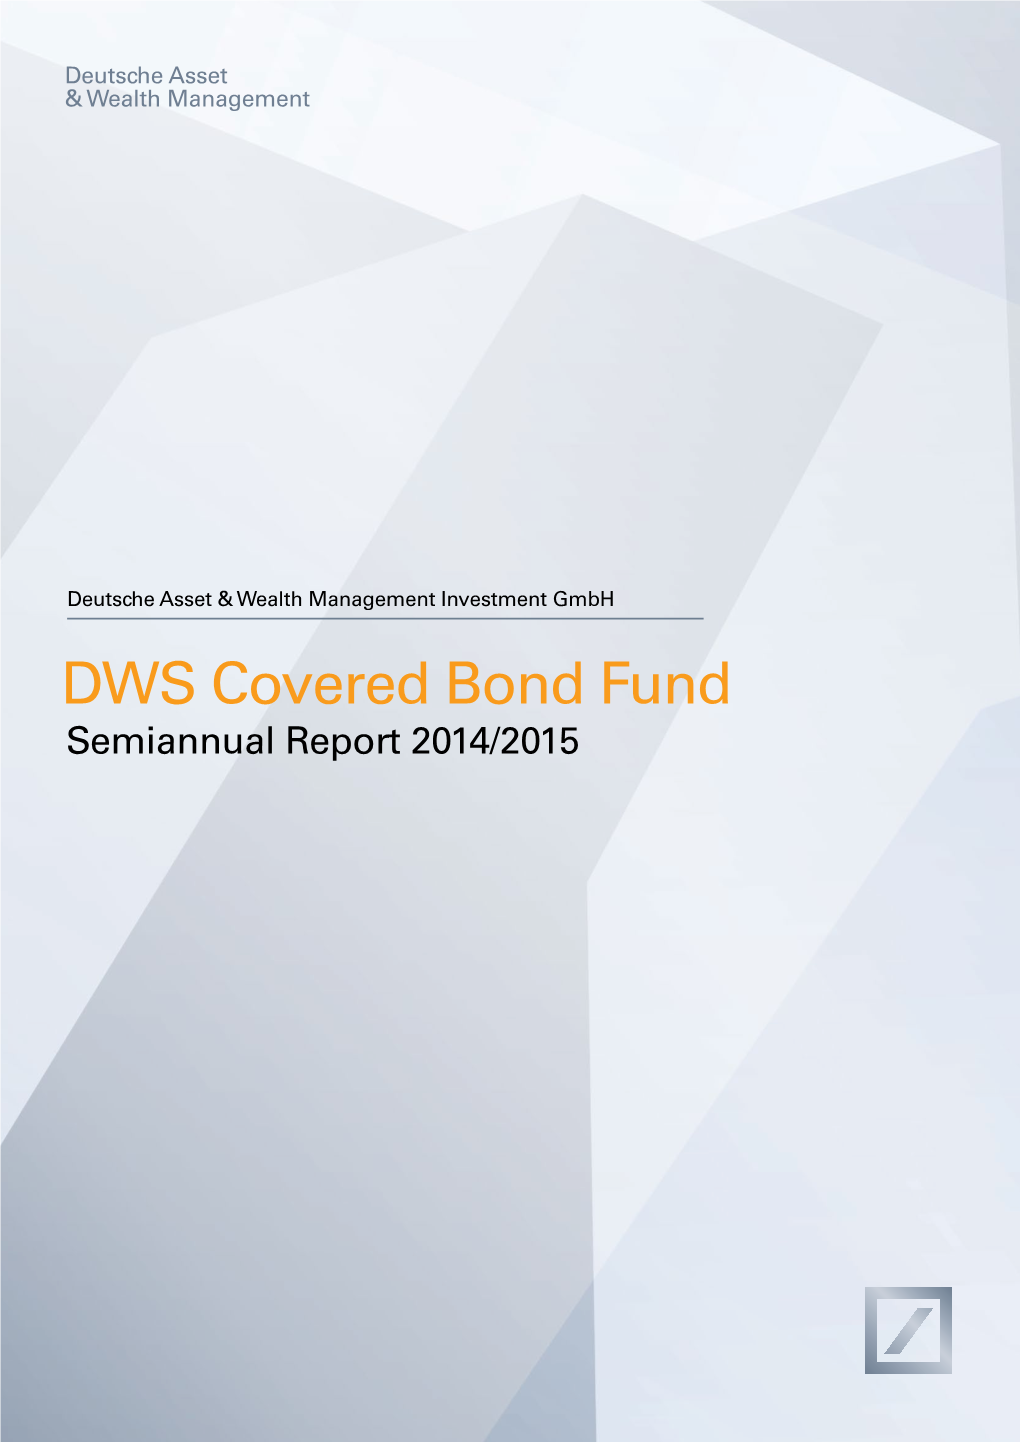 DWS Covered Bond Fund Semiannual Report 2014/2015 DWS Covered Bond Fund Contents